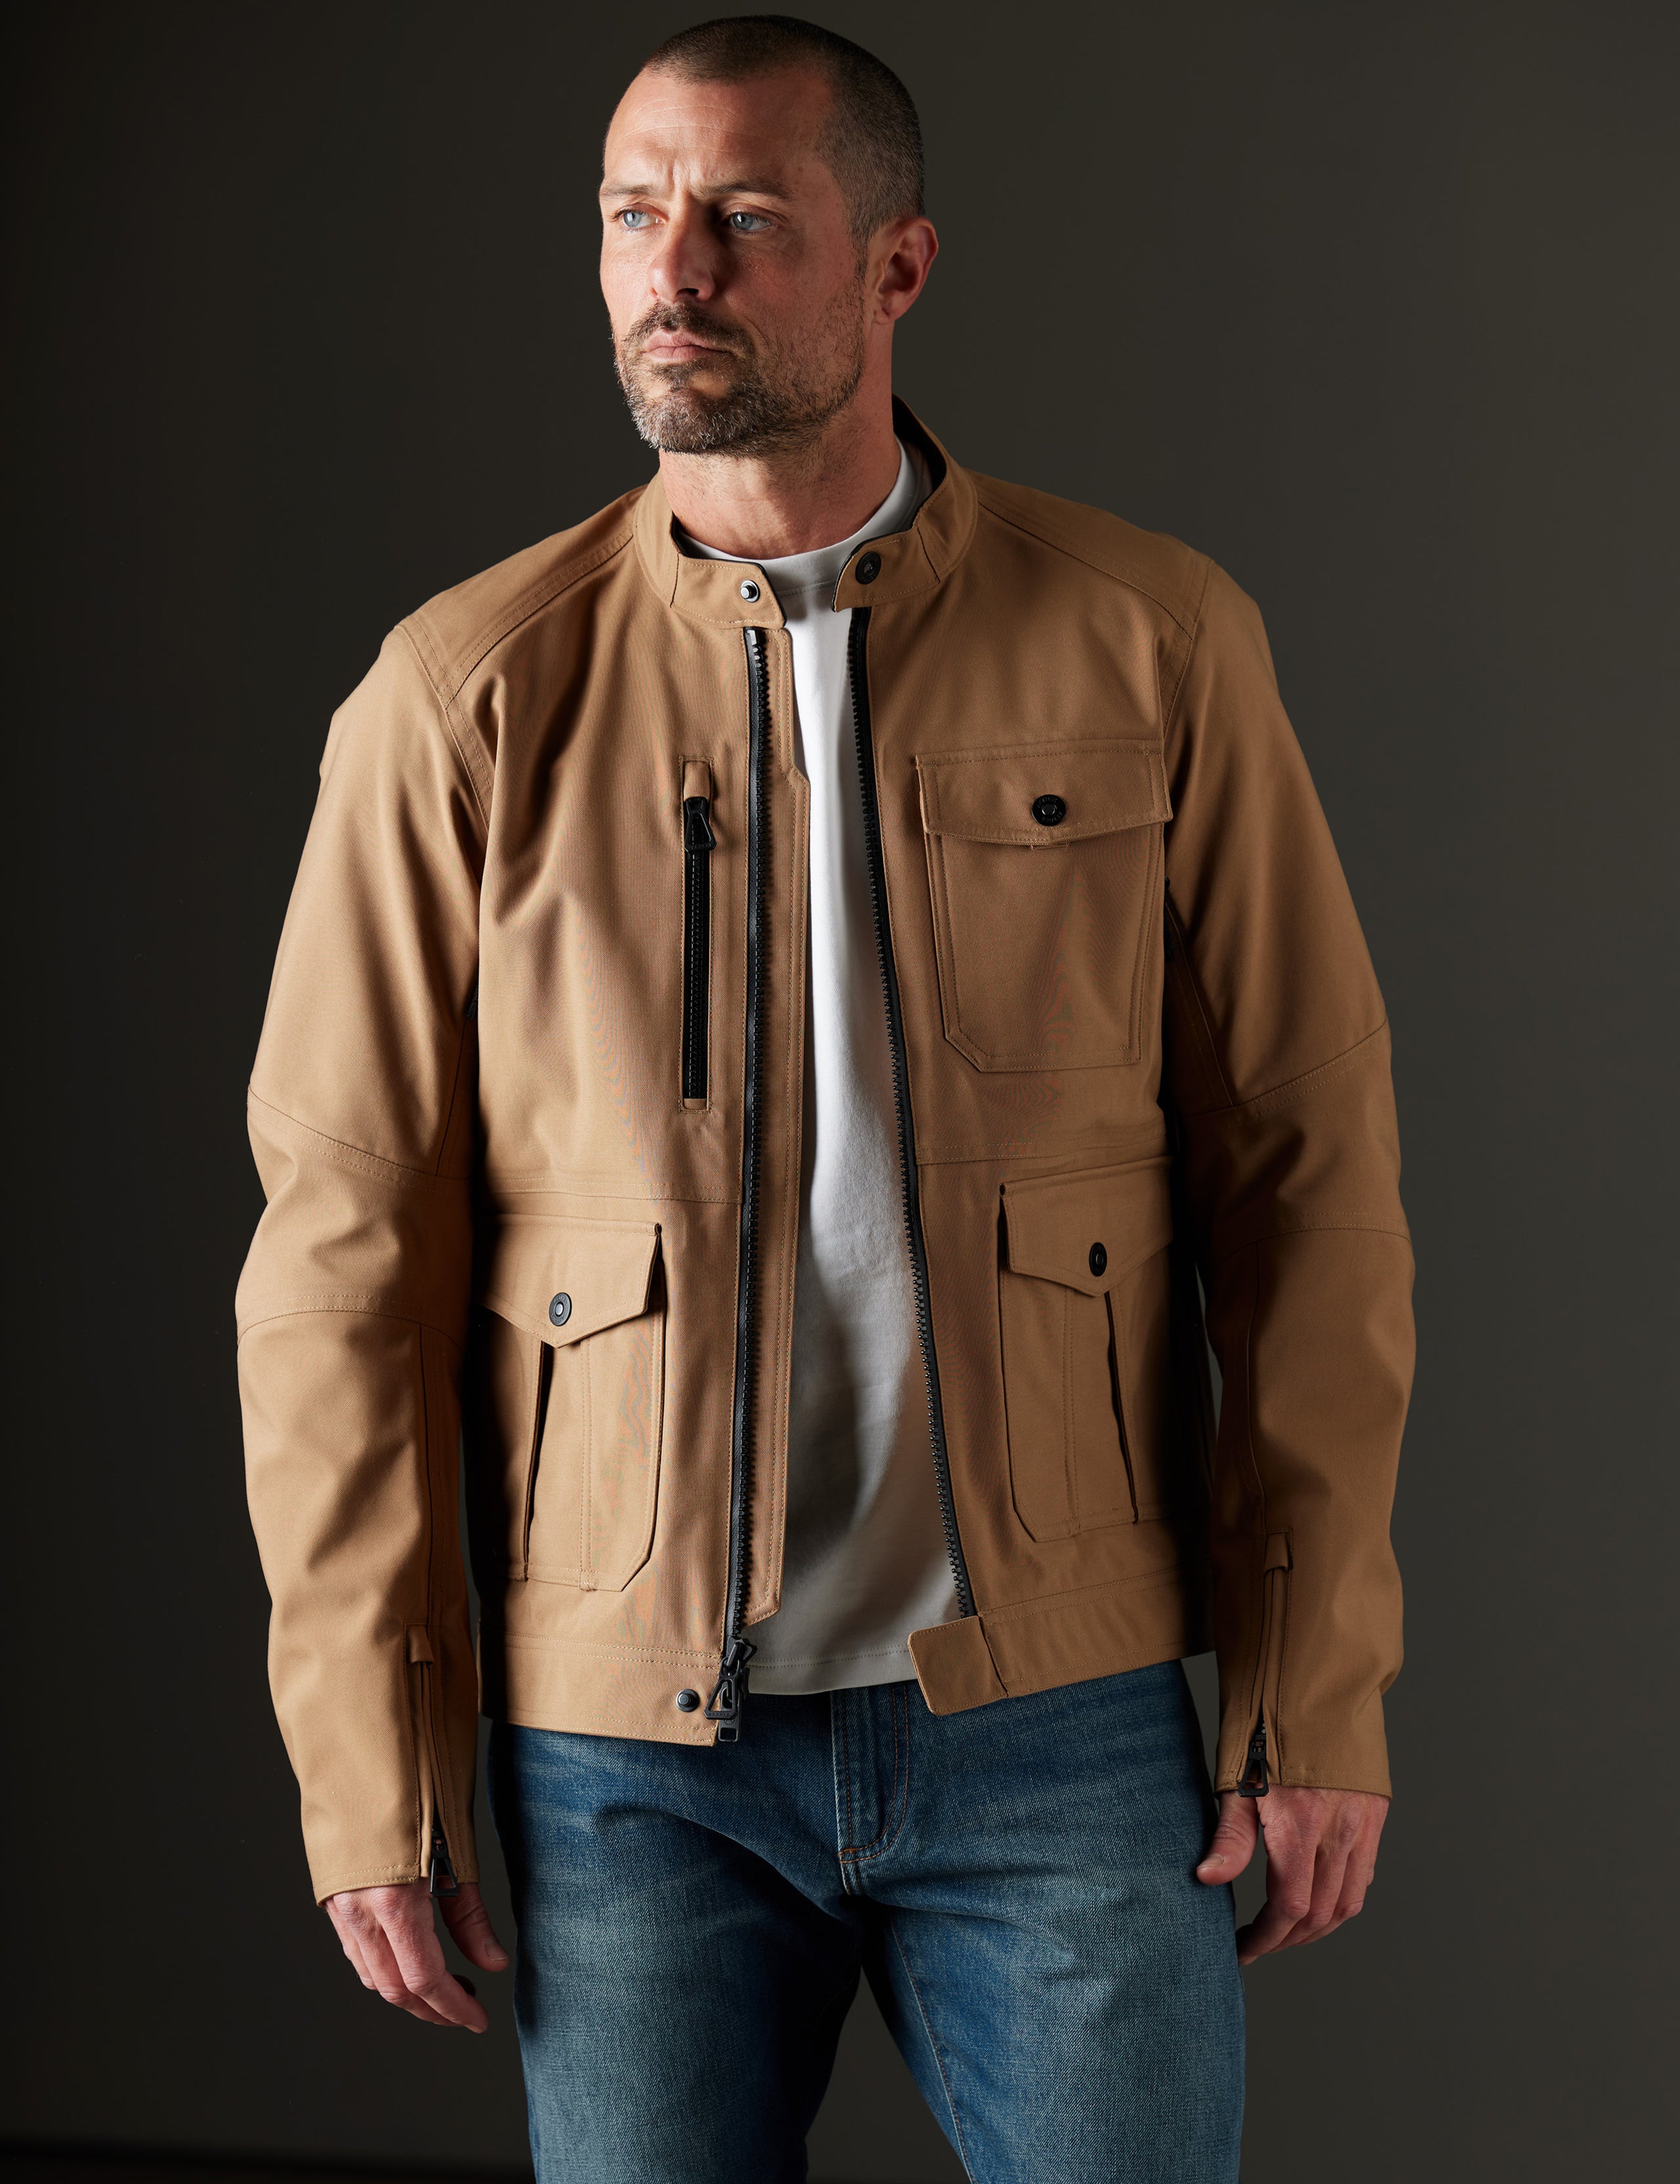 Man wearing brown motorcycle jacket from AETHER Apparel